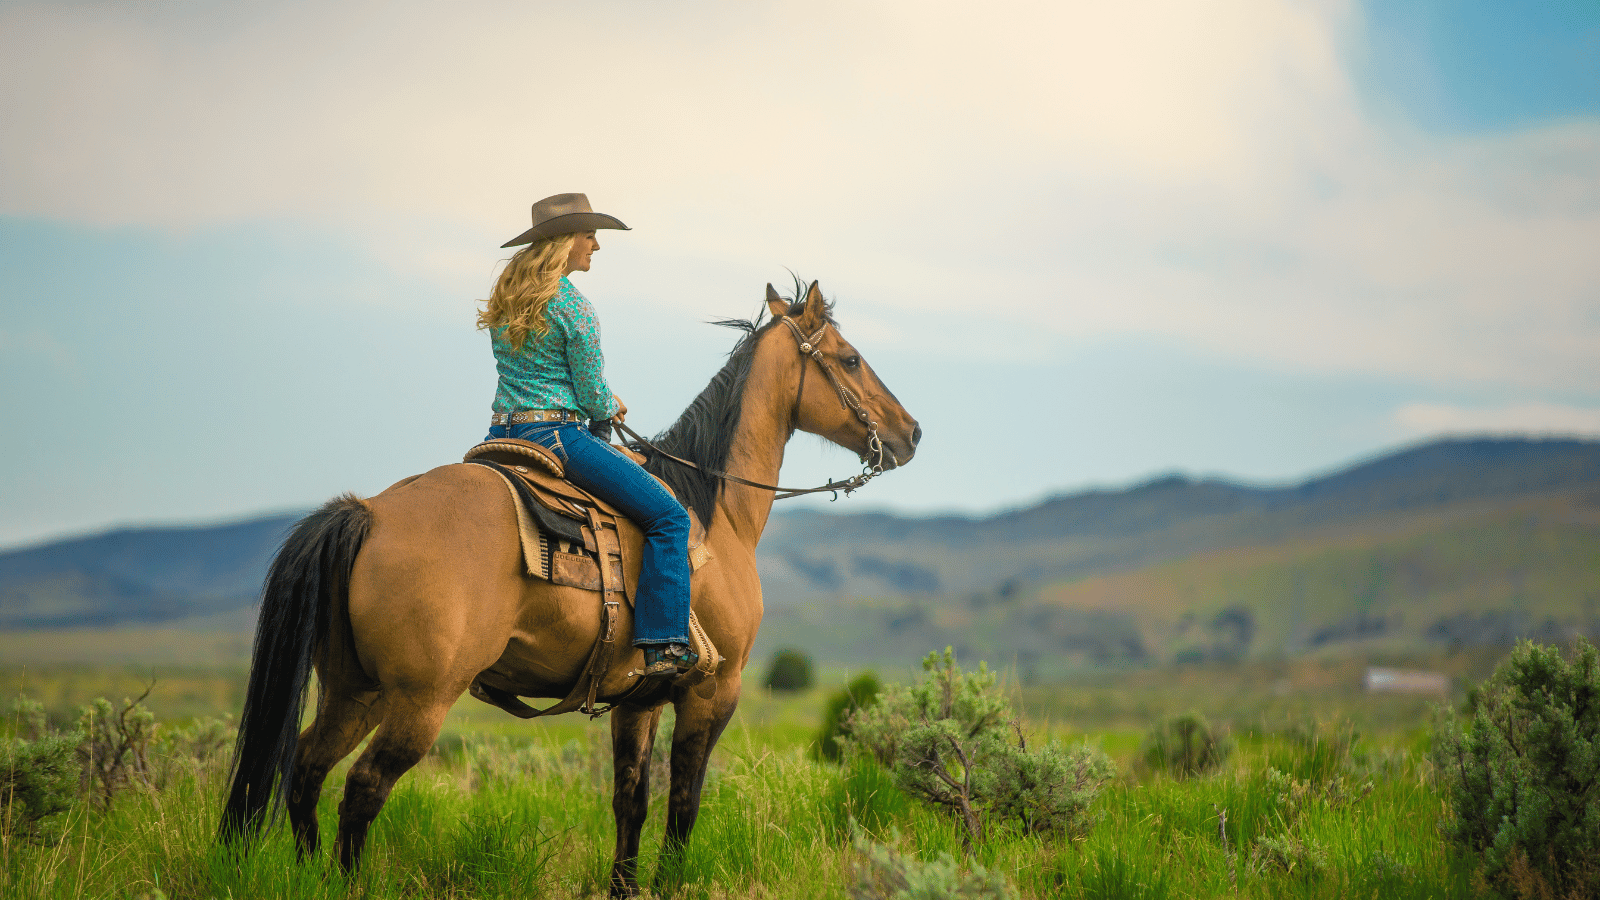 Can I Buy Used Horse Tack and Is It Safe To Do So?